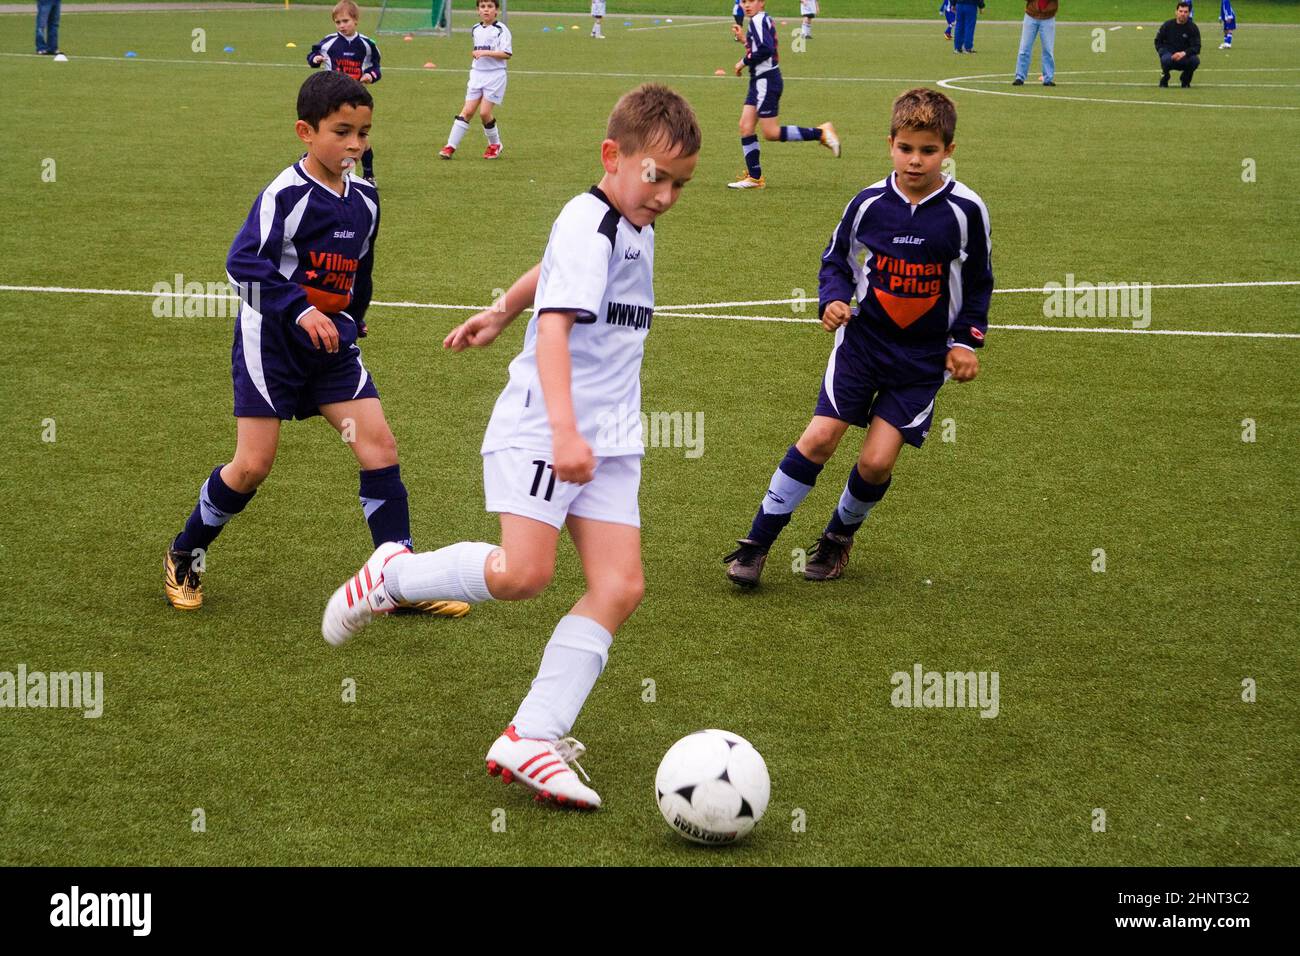 children of BSC SChwalbach playing soccer Stock Photo